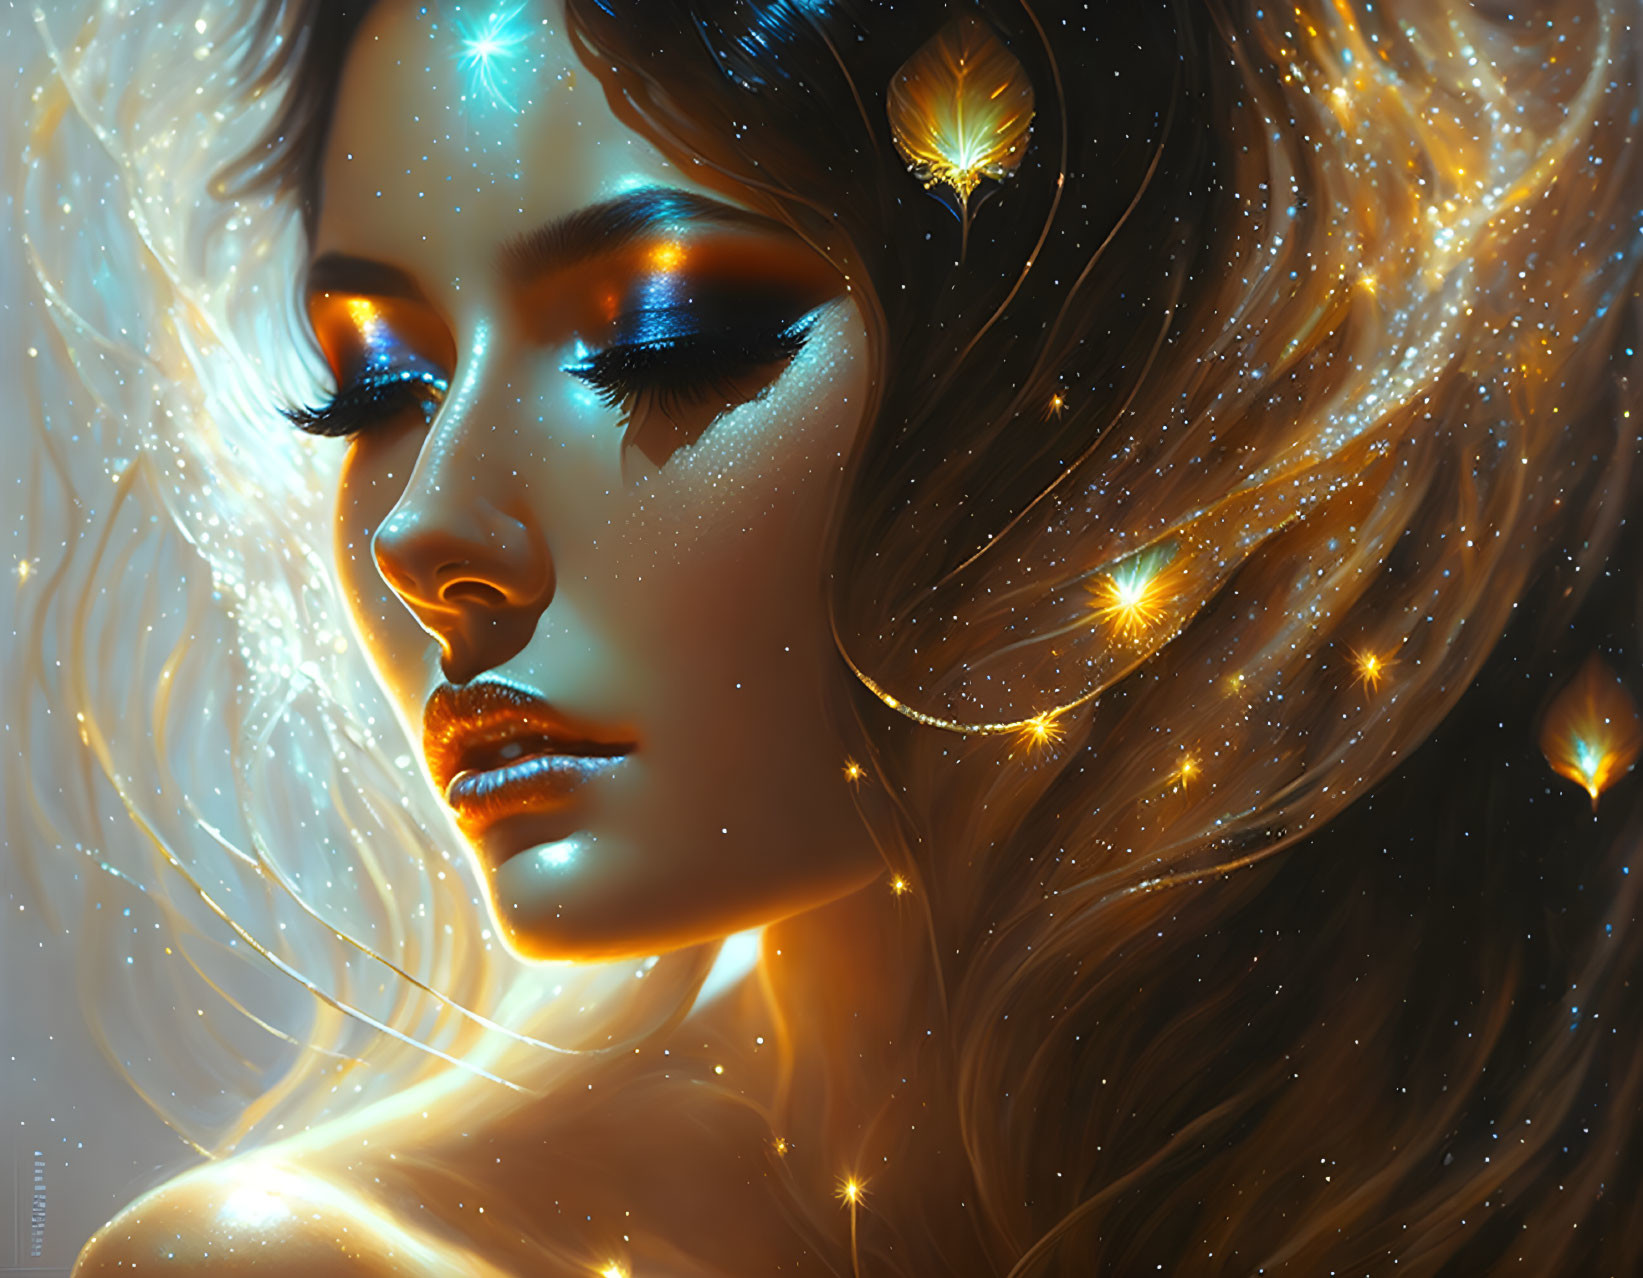 Digital portrait of a woman with luminous skin and flowing golden hair in celestial setting